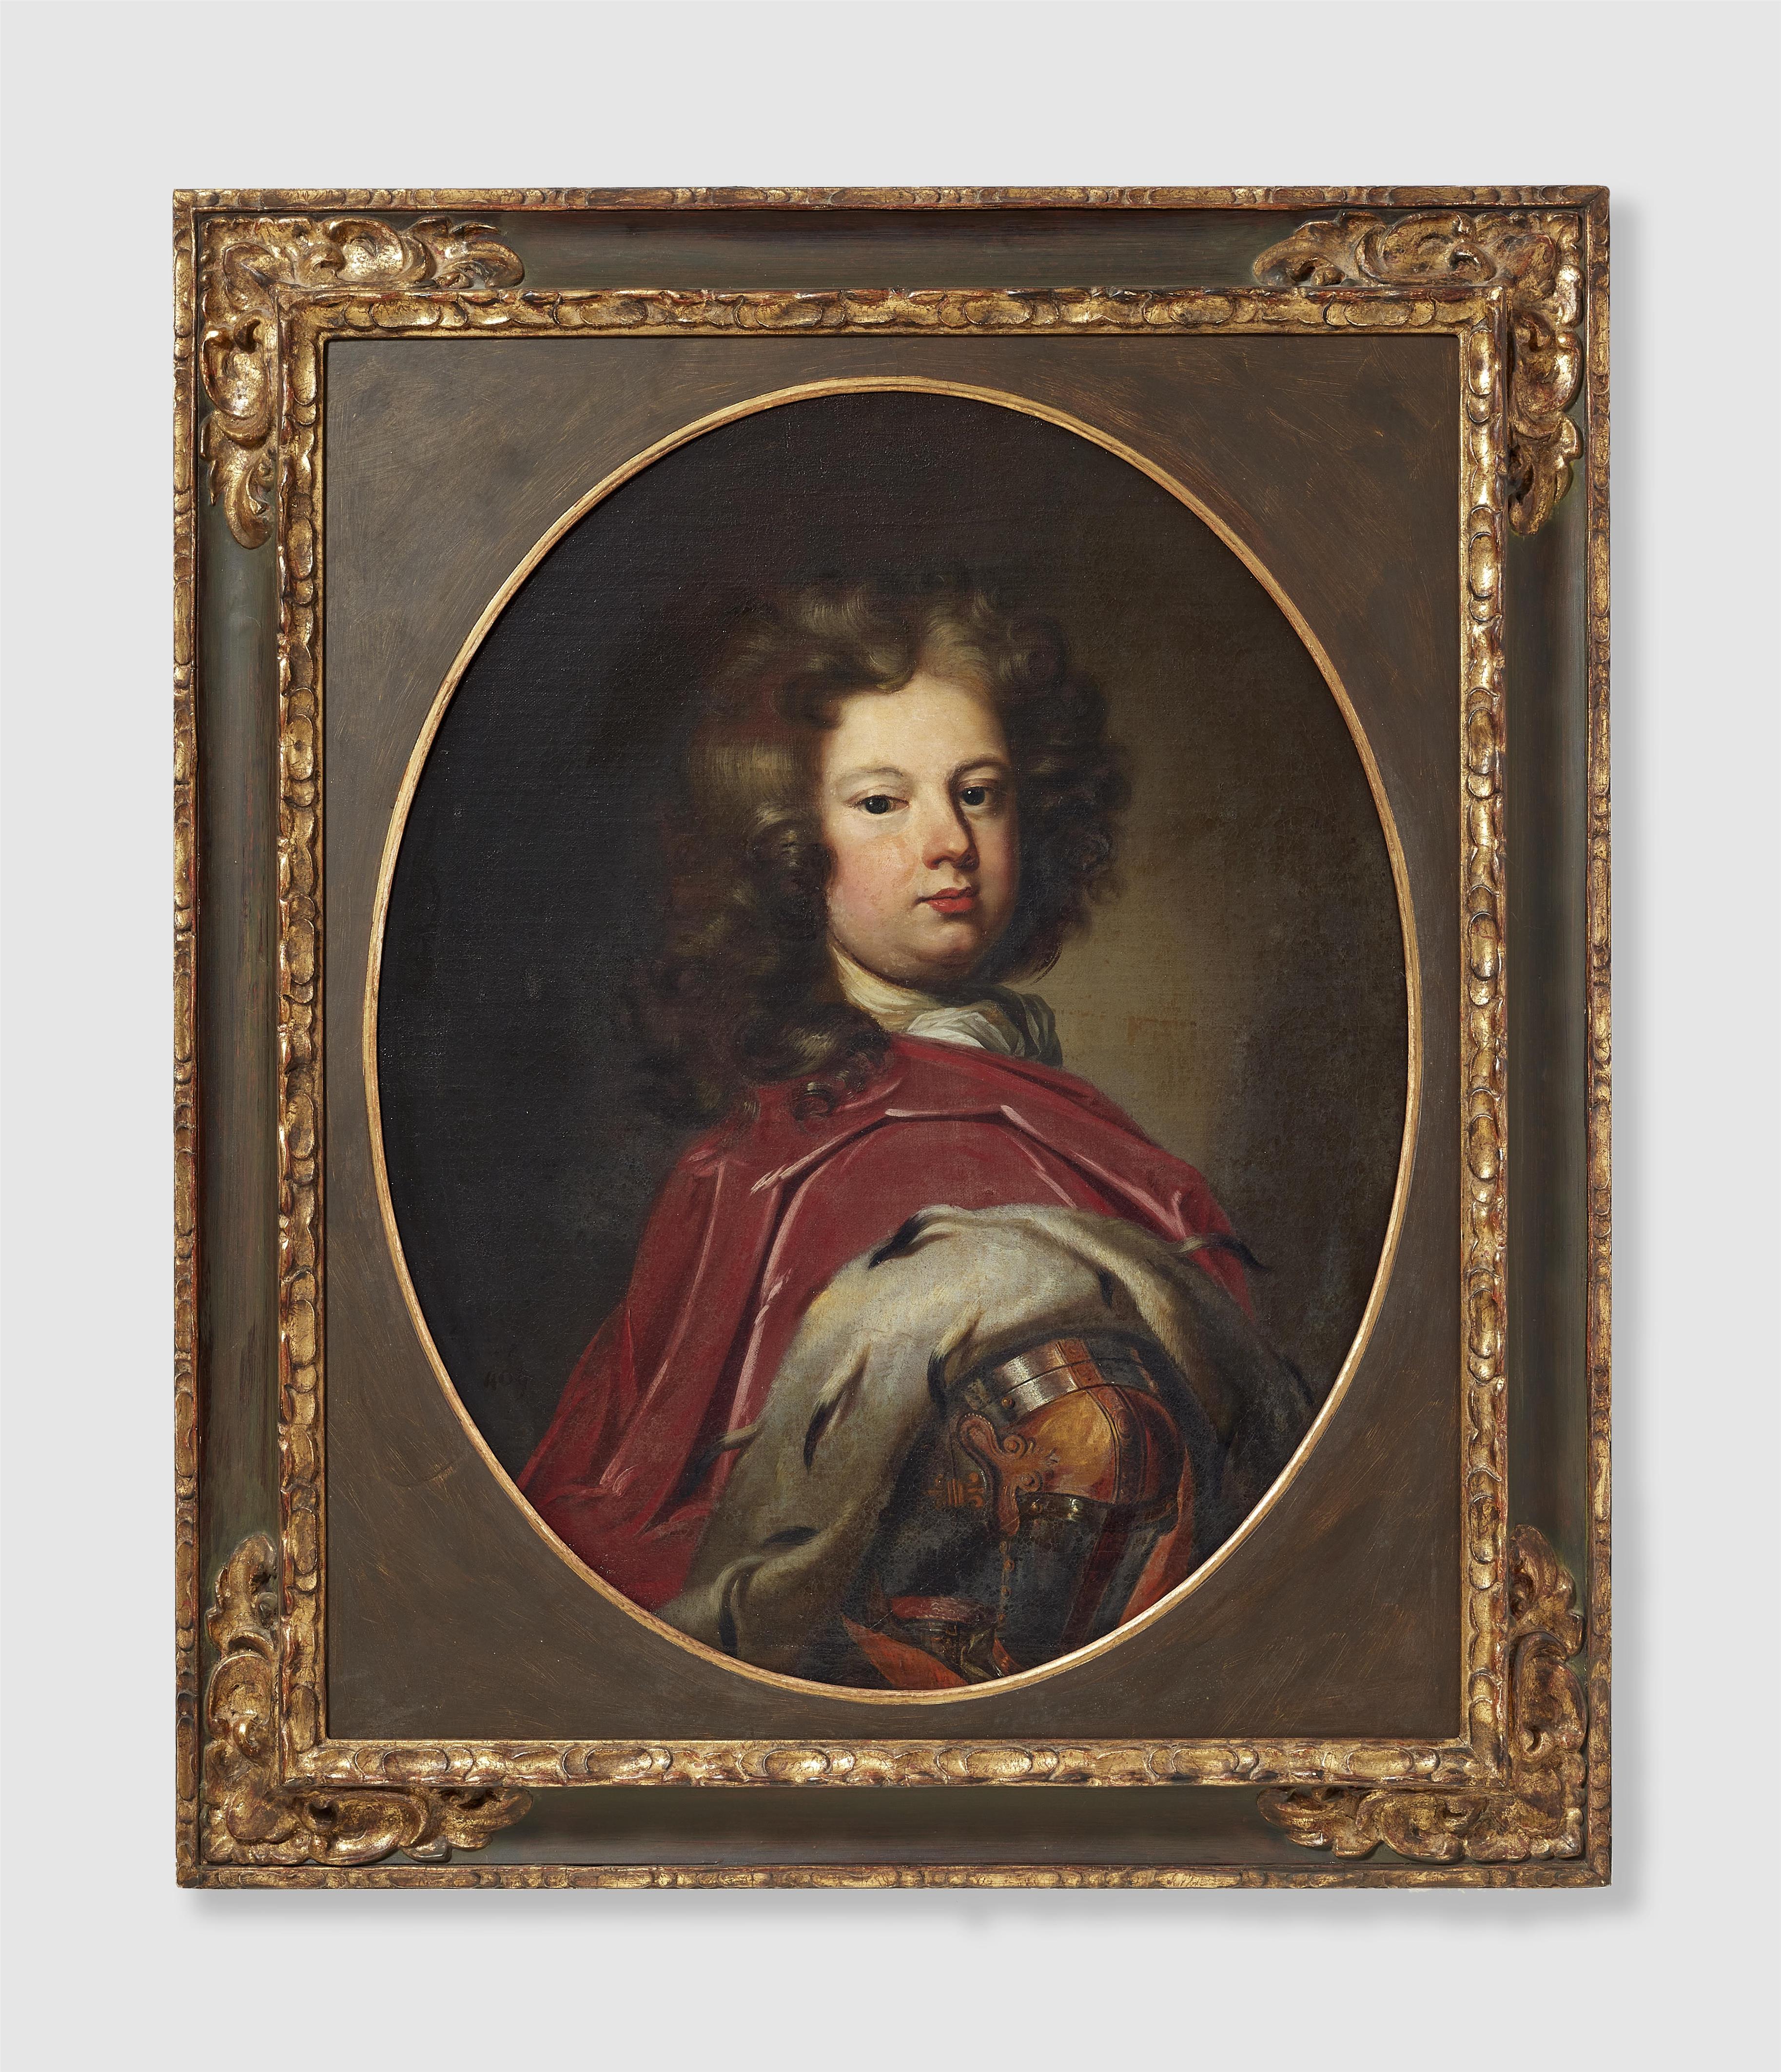 Anthoni Schoojans, attributed to - Crown Prince Friedrich Wilhelm of Prussia (1688 - 1740) - image-1